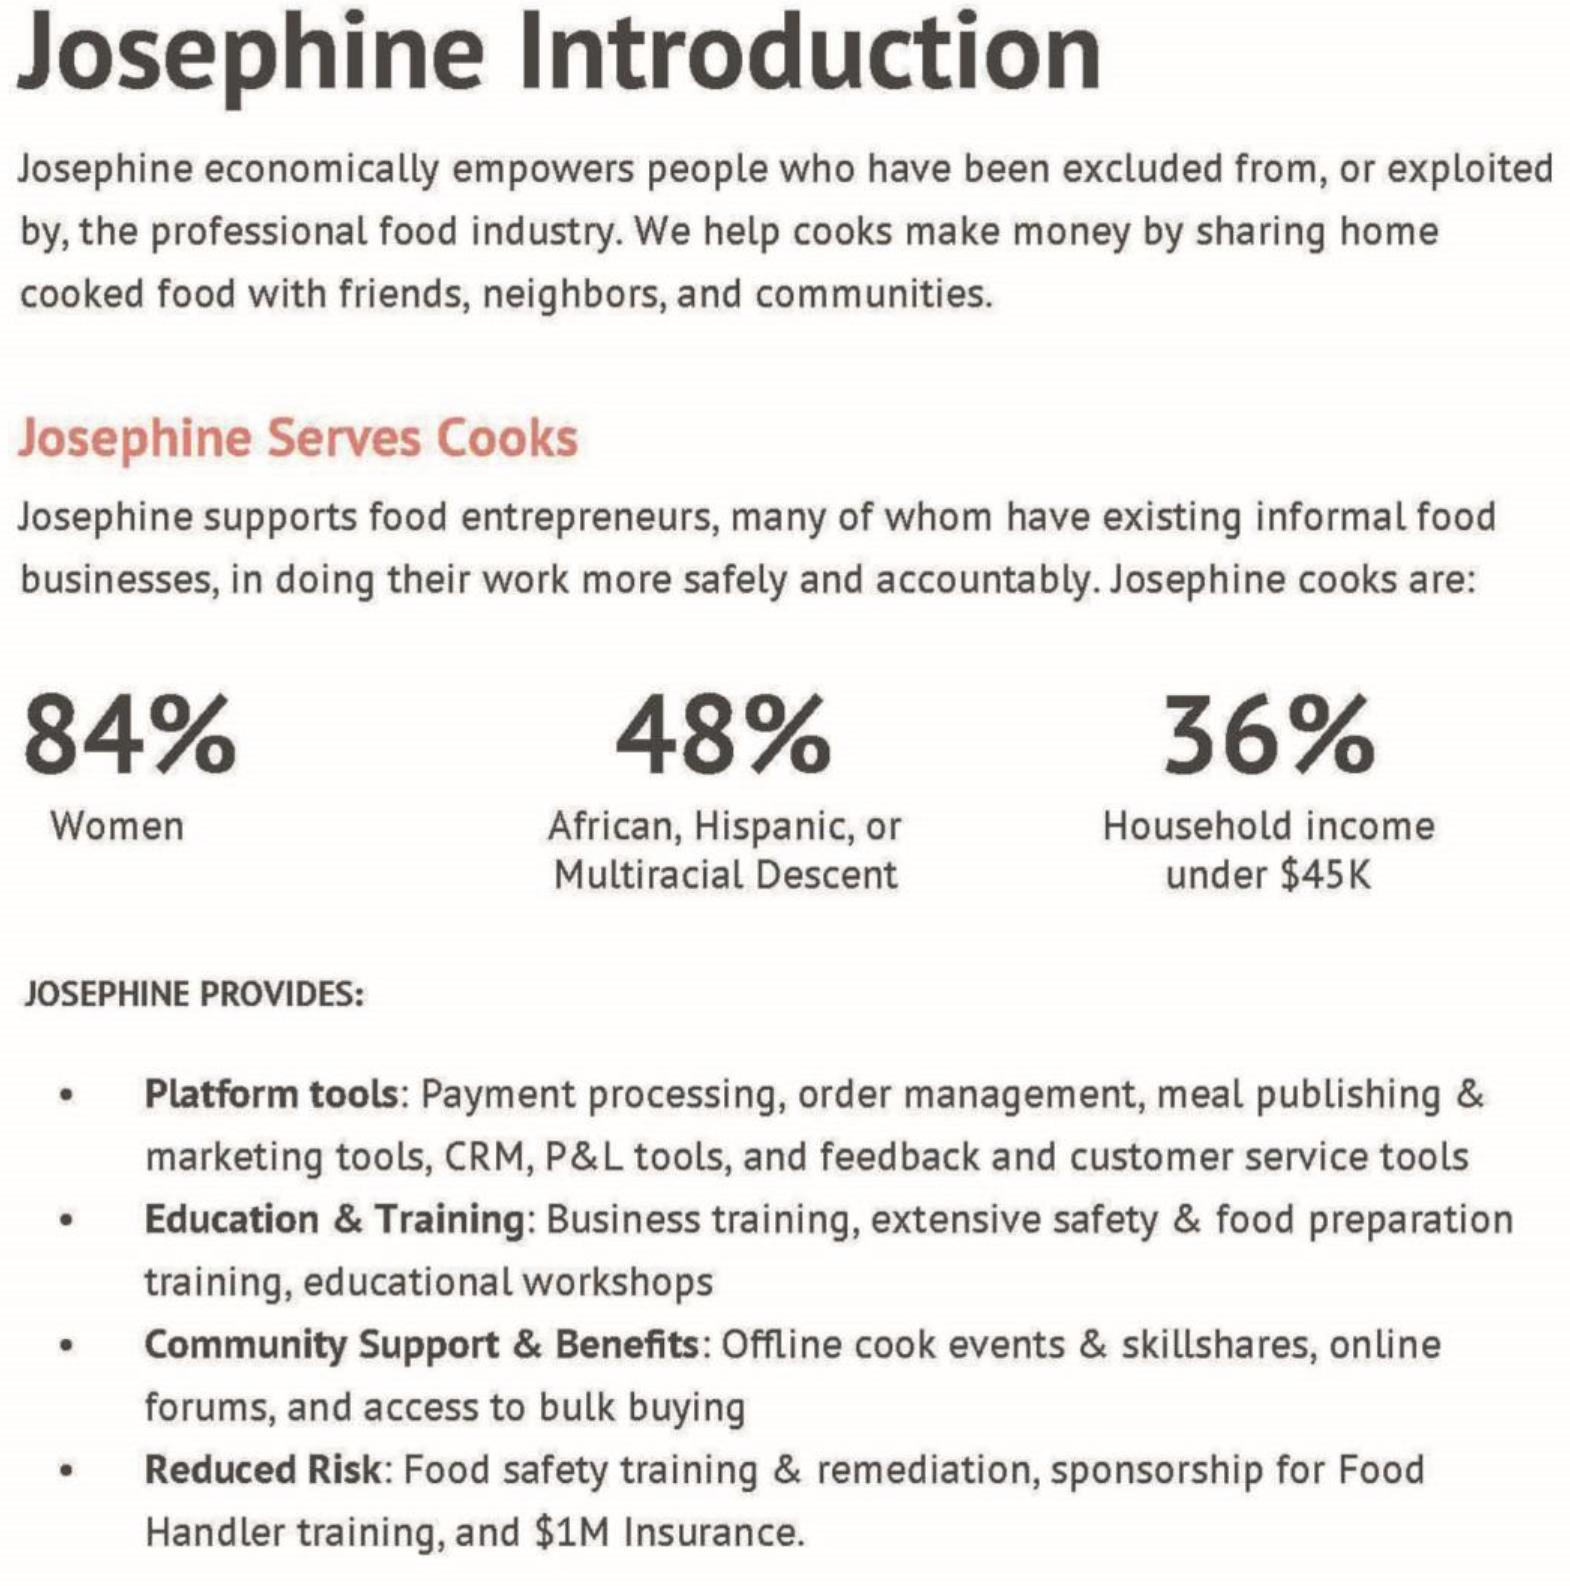 An image shows a page explaining the services provided by Josephine Company.